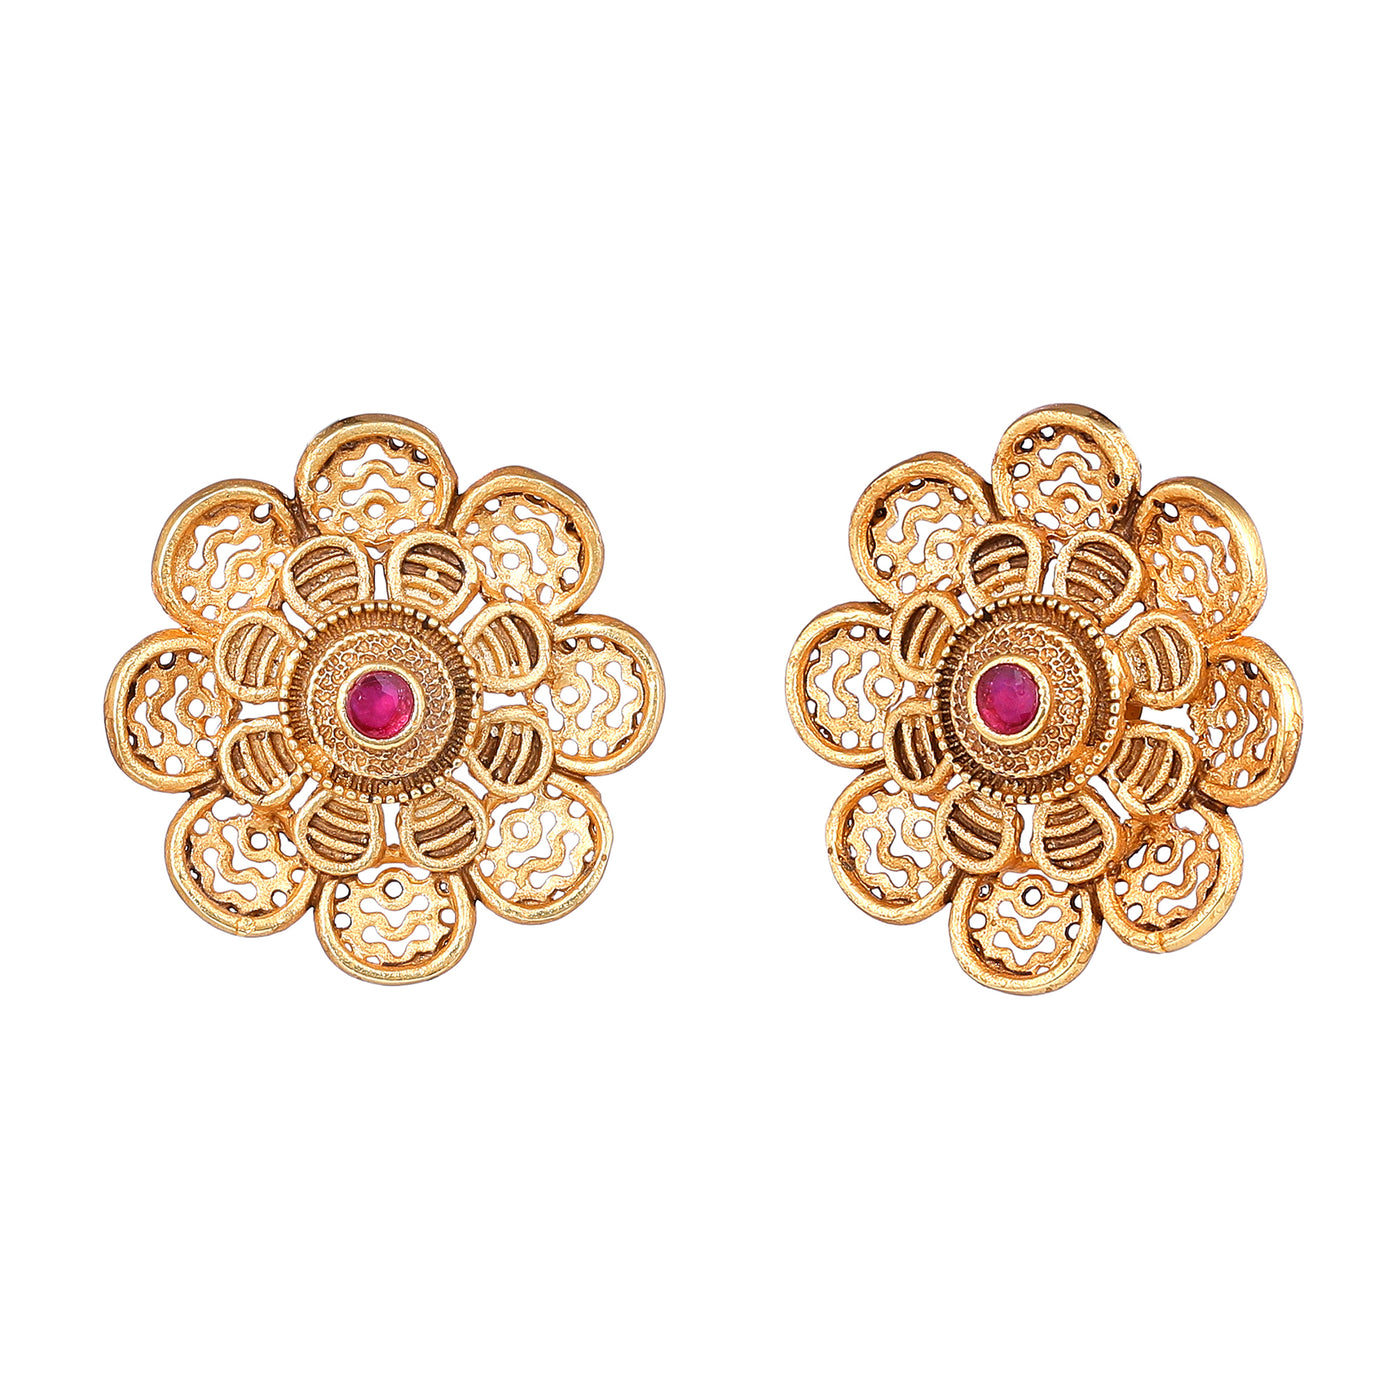 Estele Gold Plated Floral Designer Matt Finish Stud Earrings with Ruby Crystals for Women